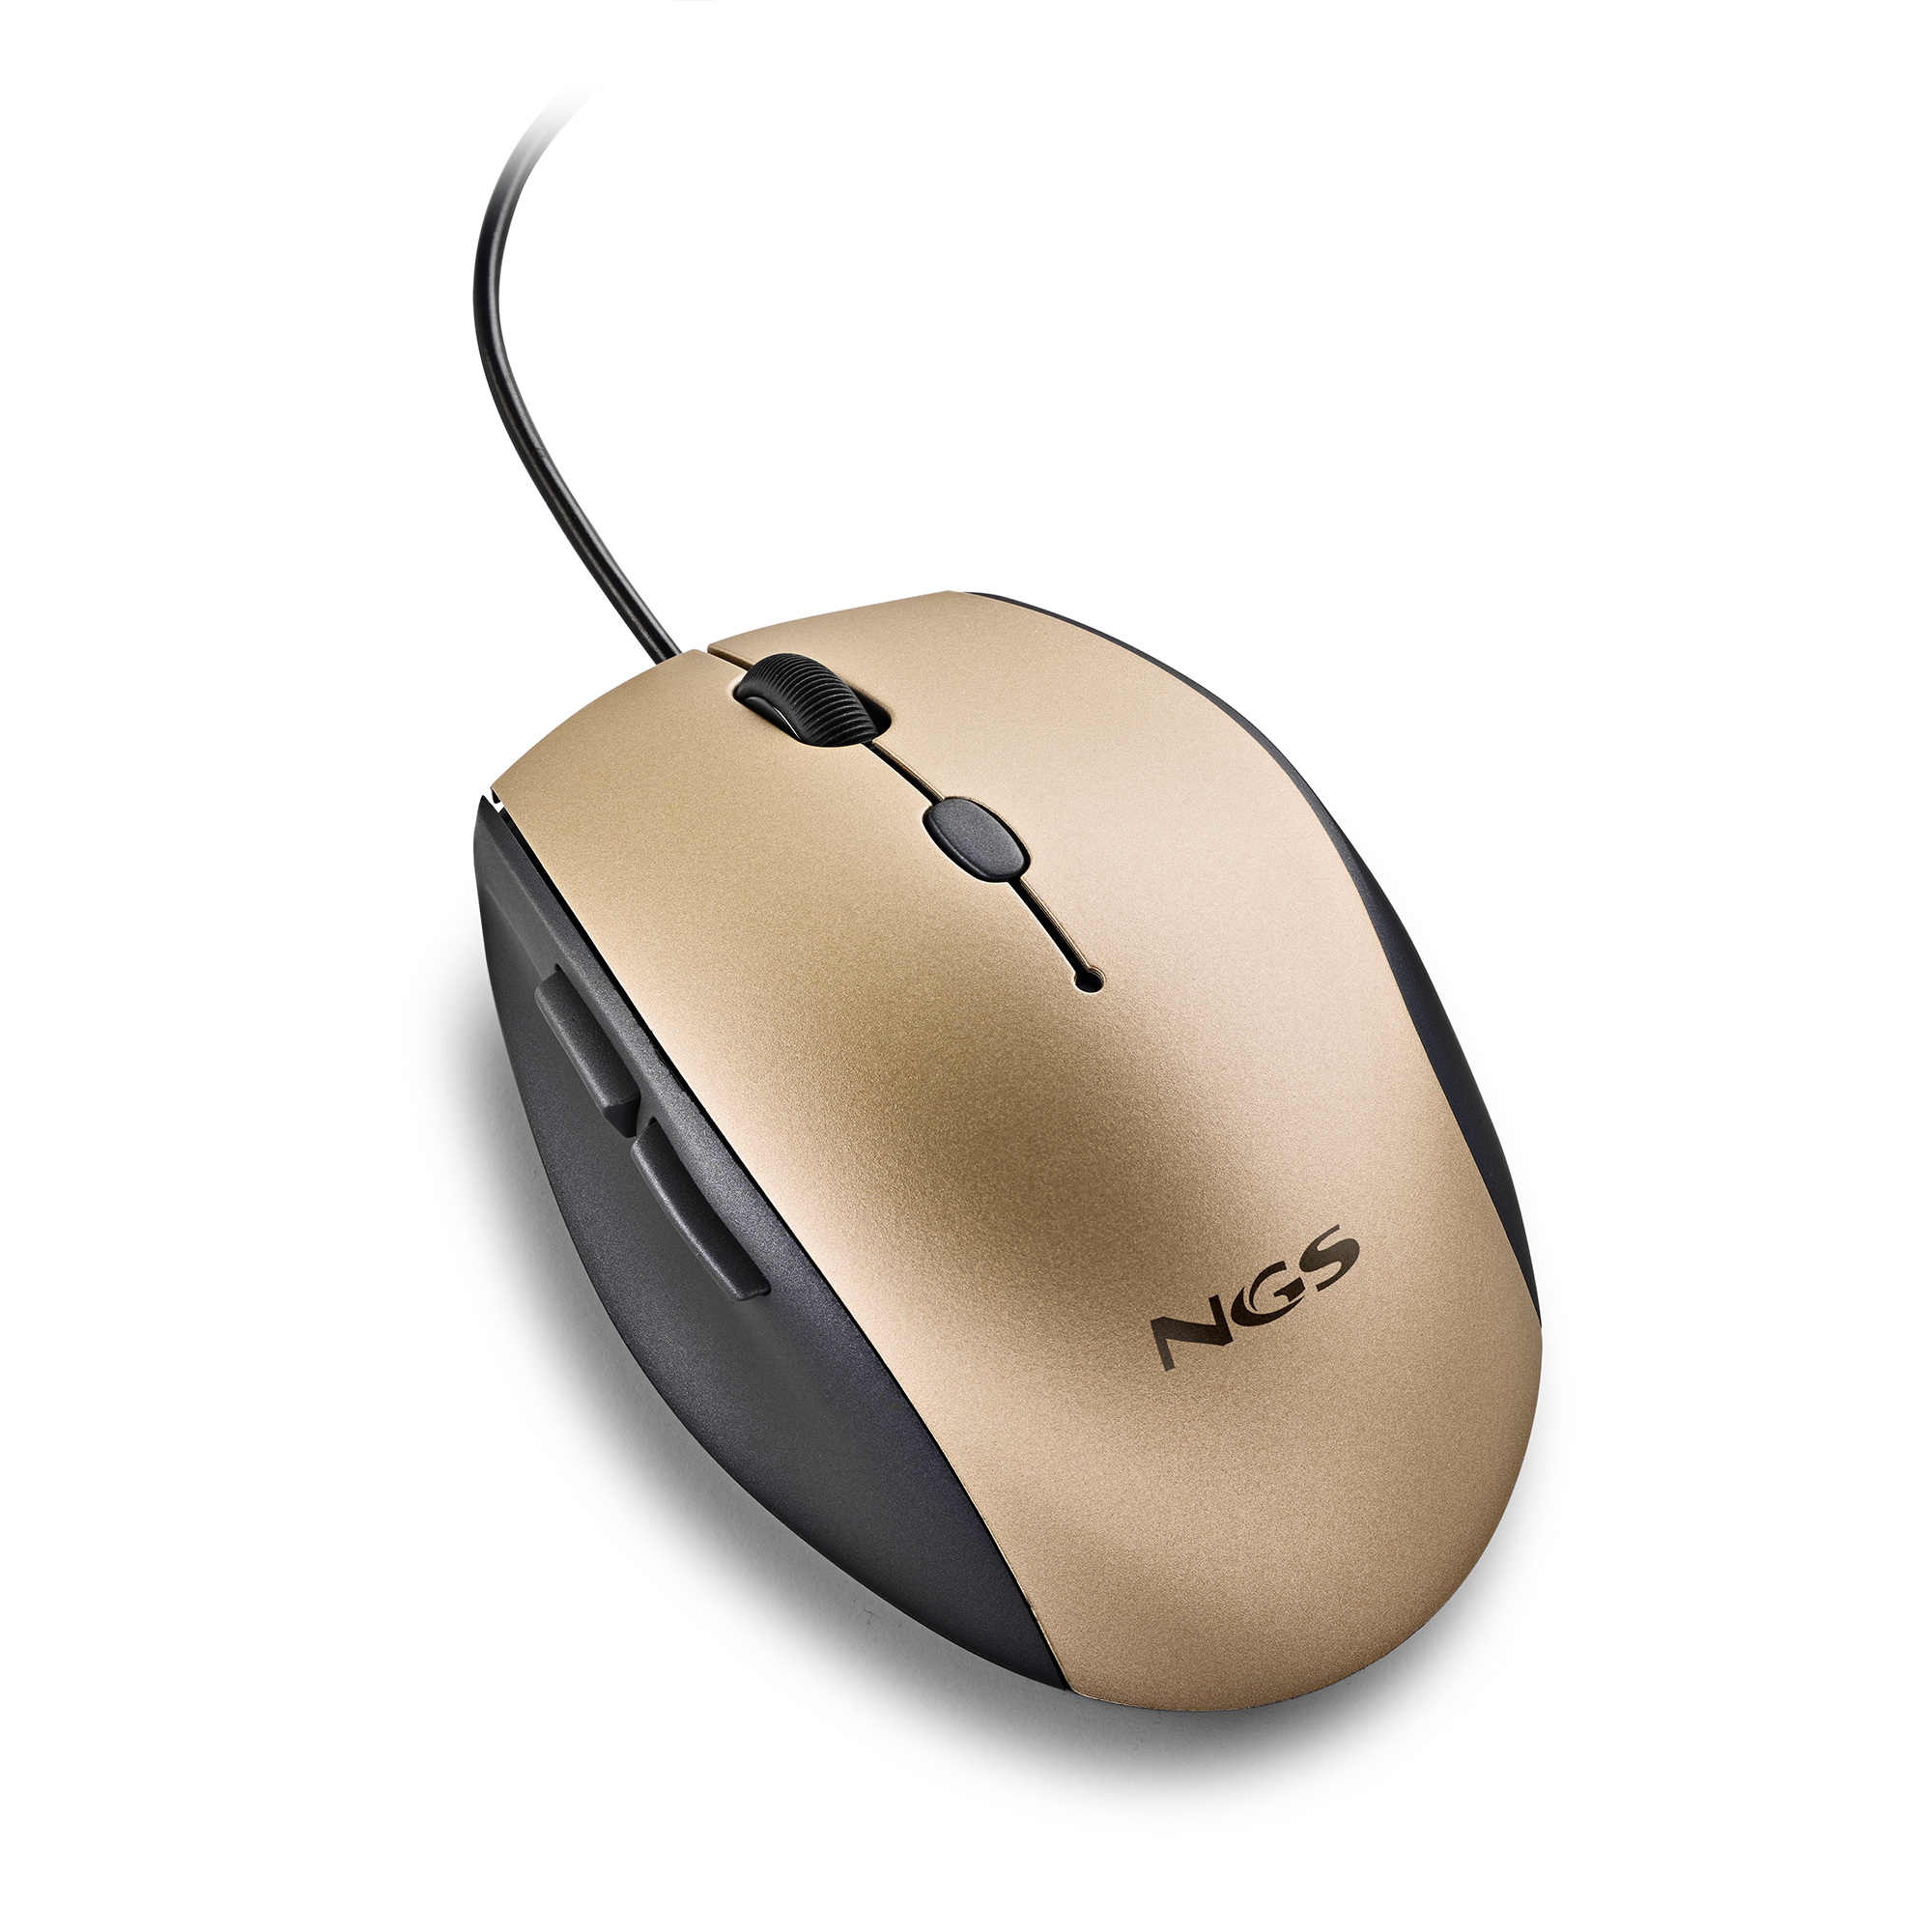 NGS MOTH GOLD Maus, Gold